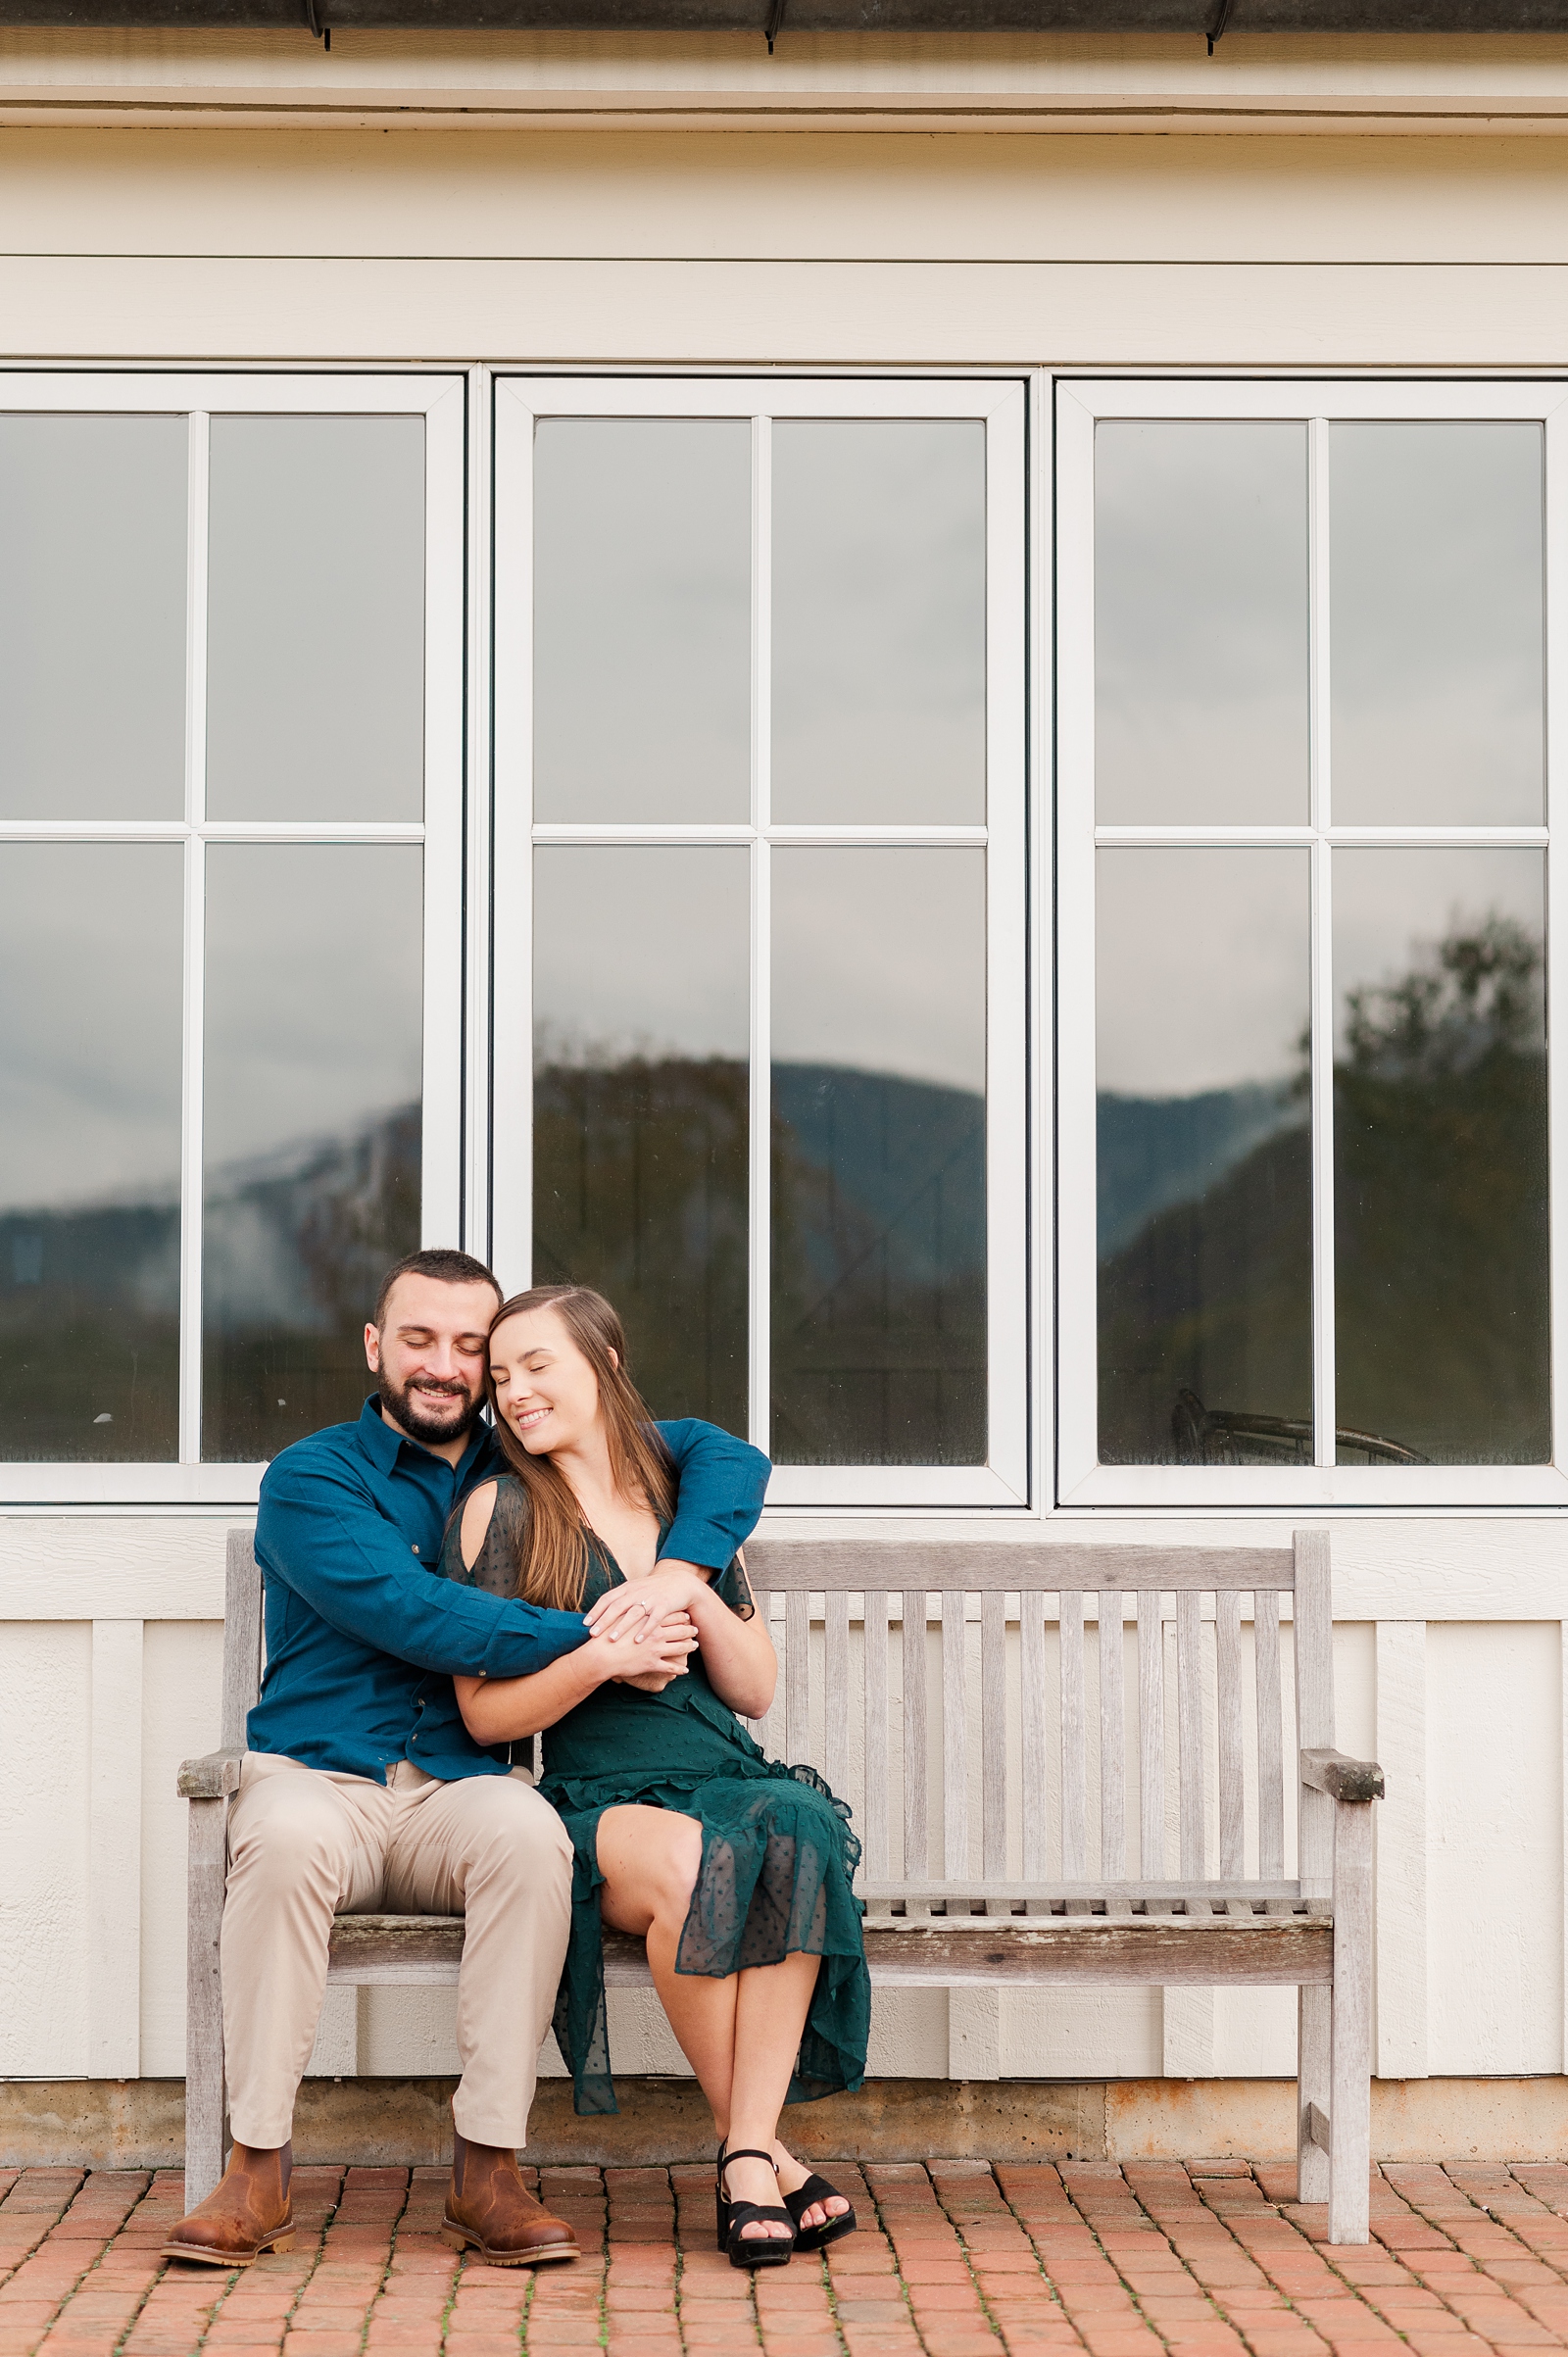 King Family Vineyards Engagement Session with Green Dress. Virginia Wedding Photographer Kailey Brianne Photography 